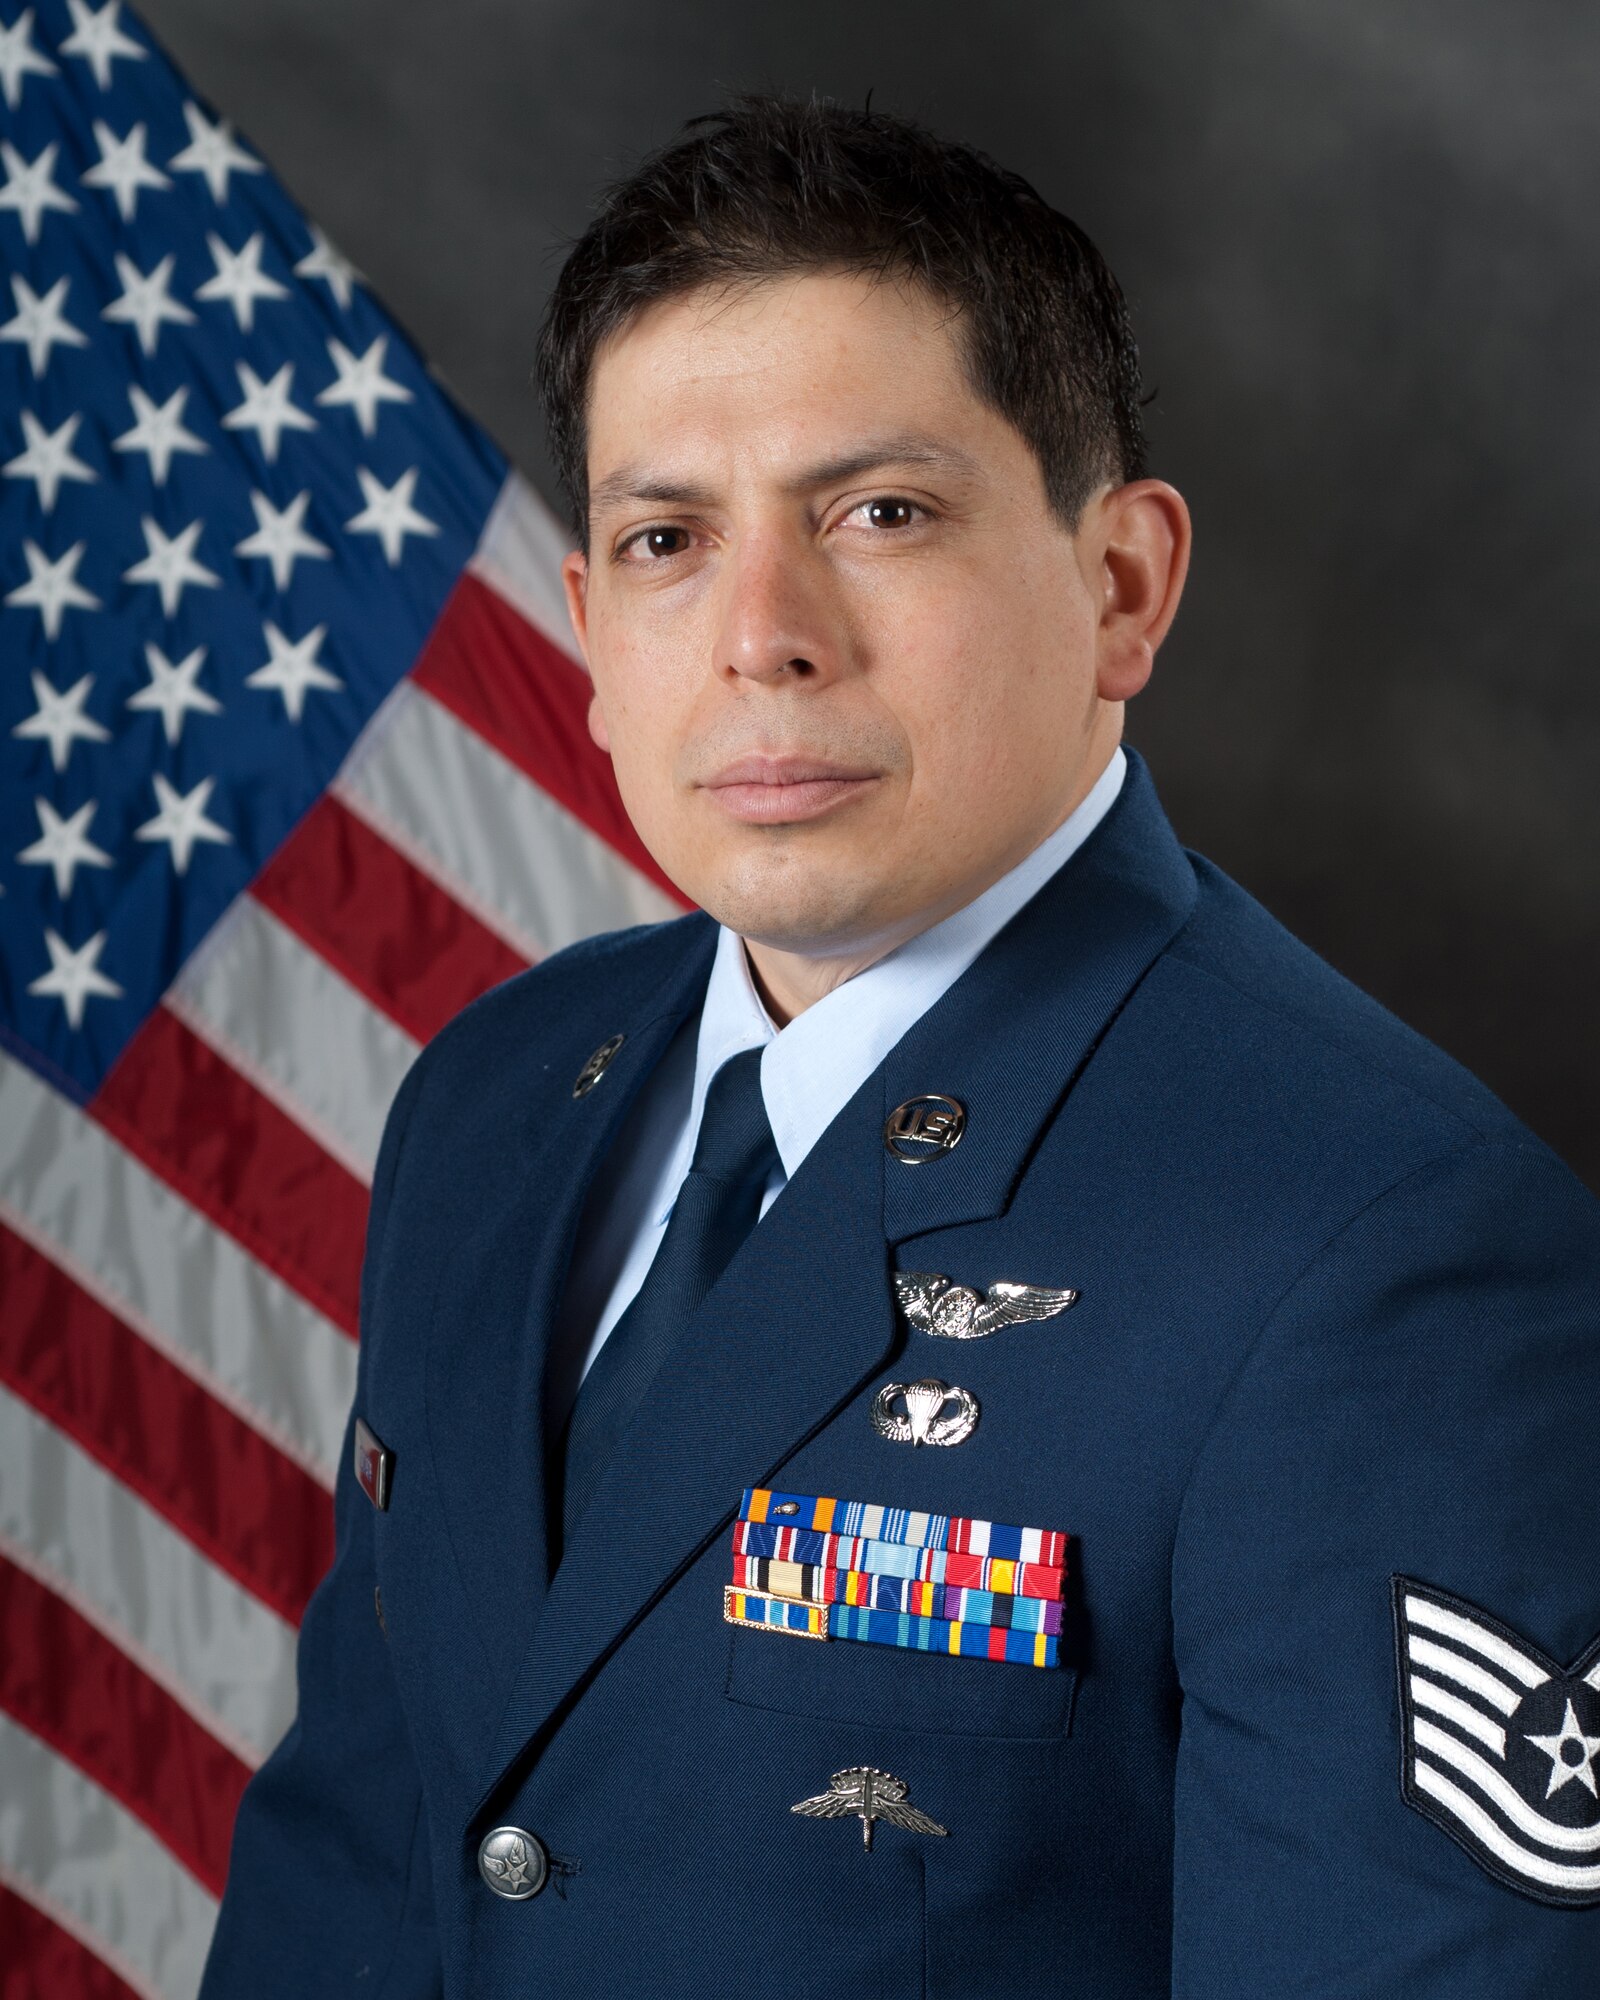 Tech. Sgt. Elmer Quijada is the Kentucky Air National Guard's 2014 Outstanding Airman of the Year in the Non-Commissioned Officer category. He will be honored during a banquet to be held March 22, 2014, at the Kentucky Fair and Exposition Center. (U.S. Air National Guard photo by Master Sgt. Philip Speck)